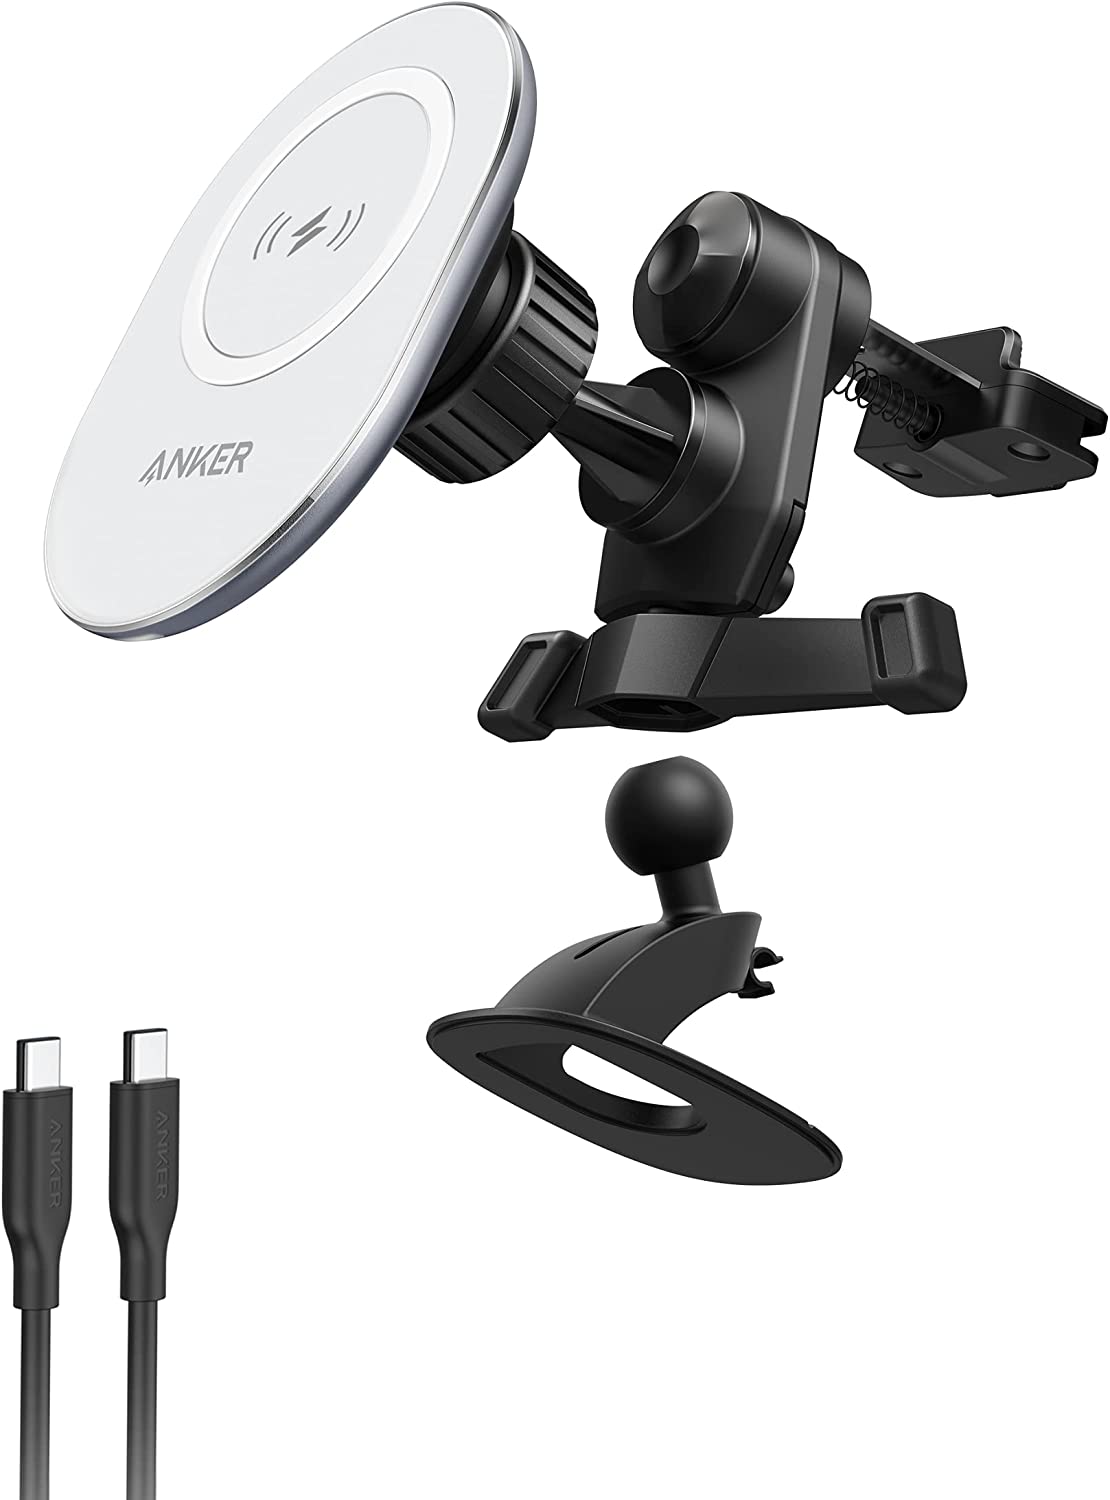 Anker's new car-mount charger offers 7.5W of power.